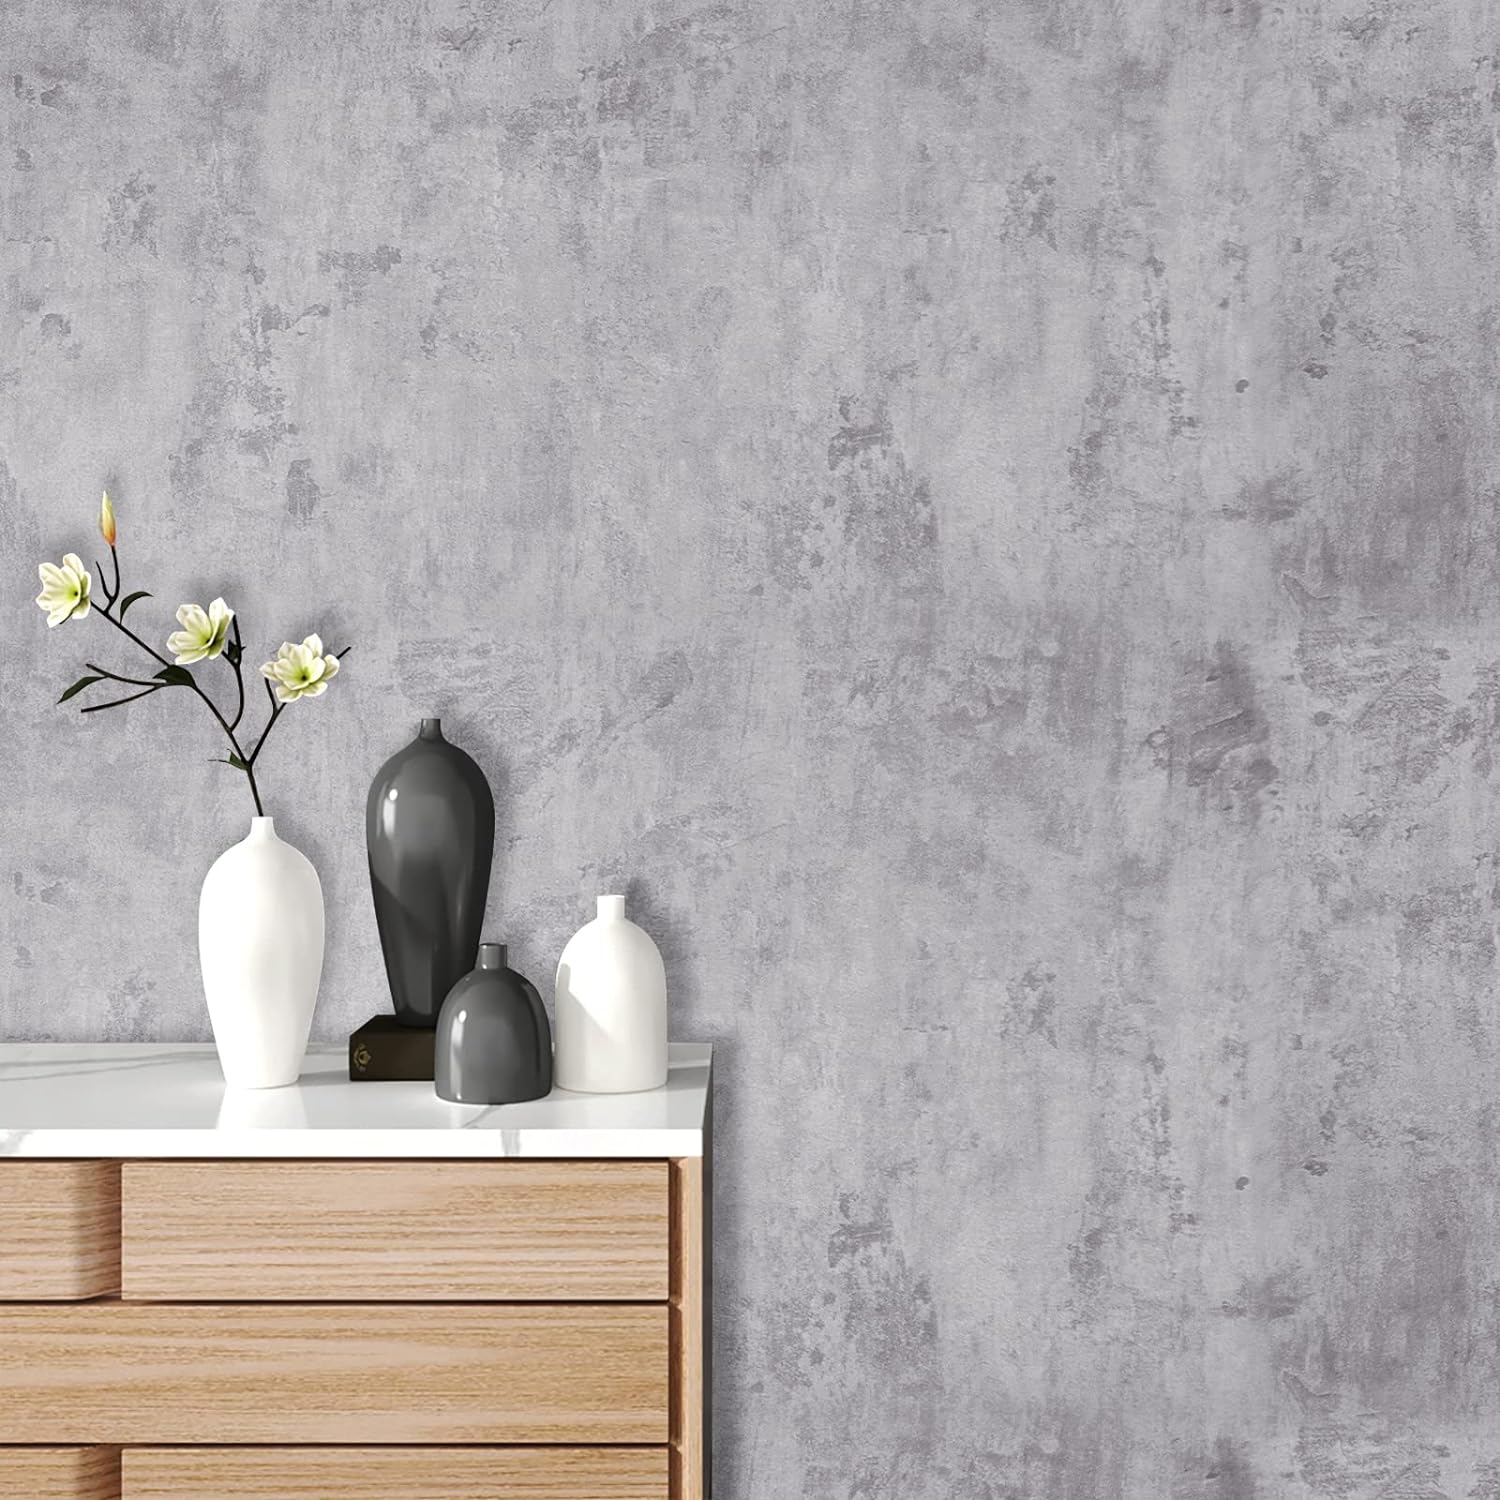 Stickyart Textured Stained Grey Concrete Wallpaper Roll Peel and Stick Cement Wallpaper Matte Self Adhesive Vinyl Wallpaper Concrete Look Rustic Removable Wallpaper for Bedroom Living Room 12x160